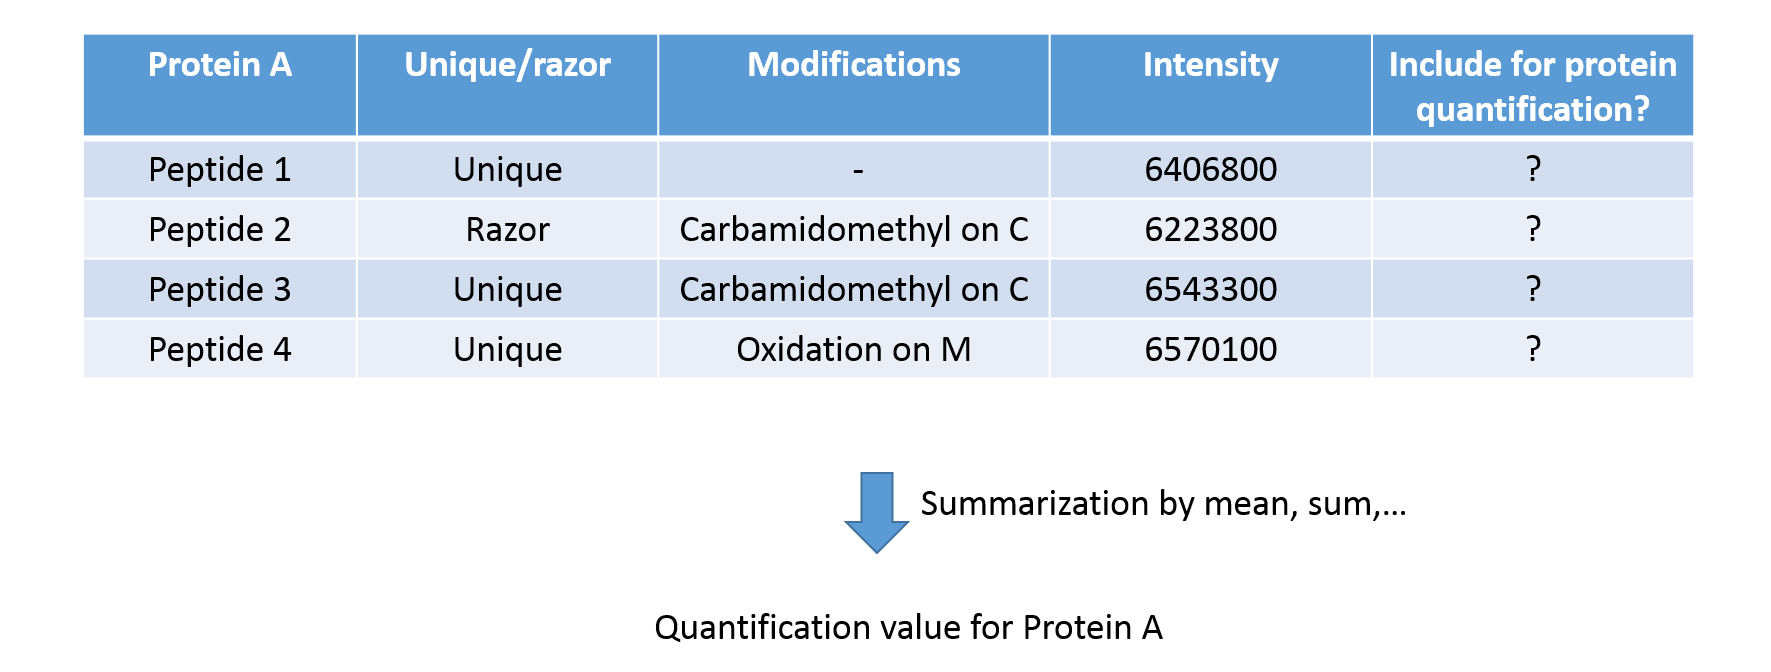 table with peptides 1-4. Some are unique, some are 'razor'. Some have modificatinos. Their intensities are listed. This table has an arrow below for 'summarization by mean, sum, ...' and quantificatino value for Protein A.